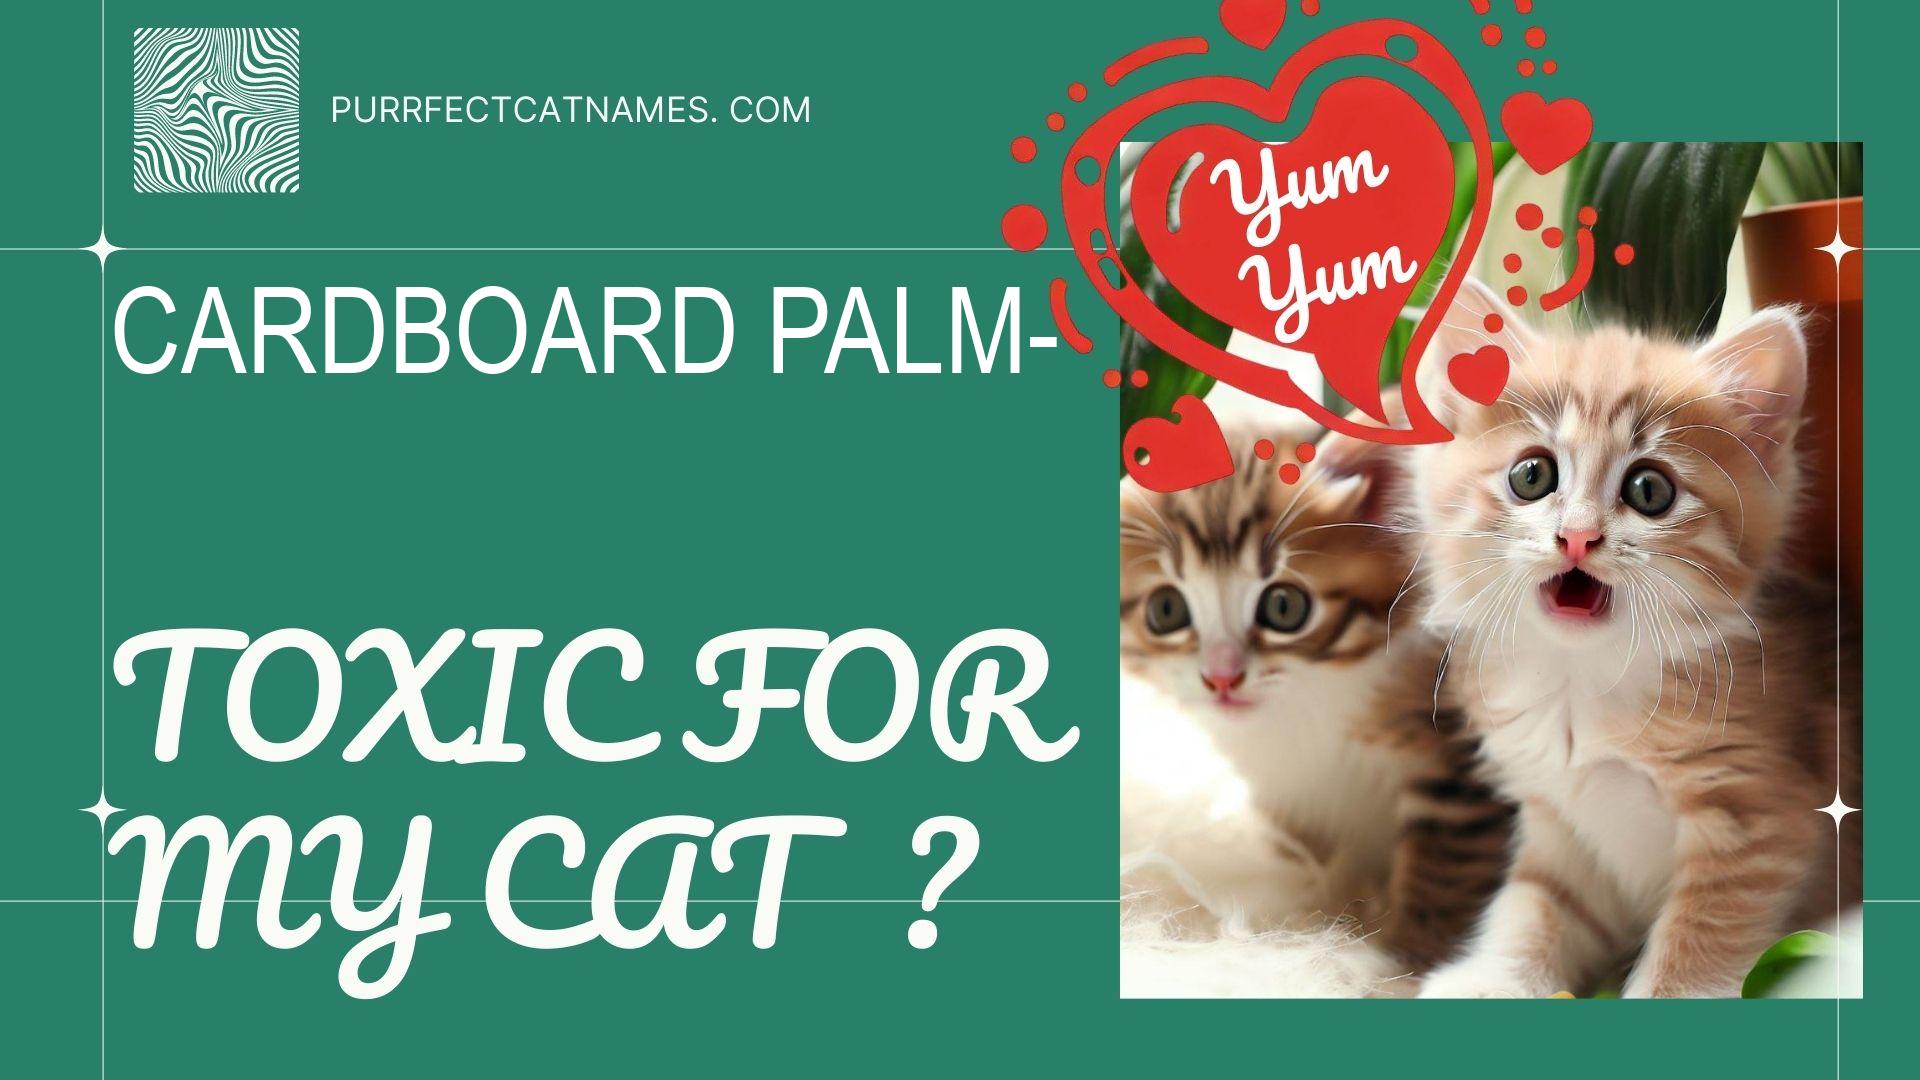 IsCardboard Palm plant toxic for your cat